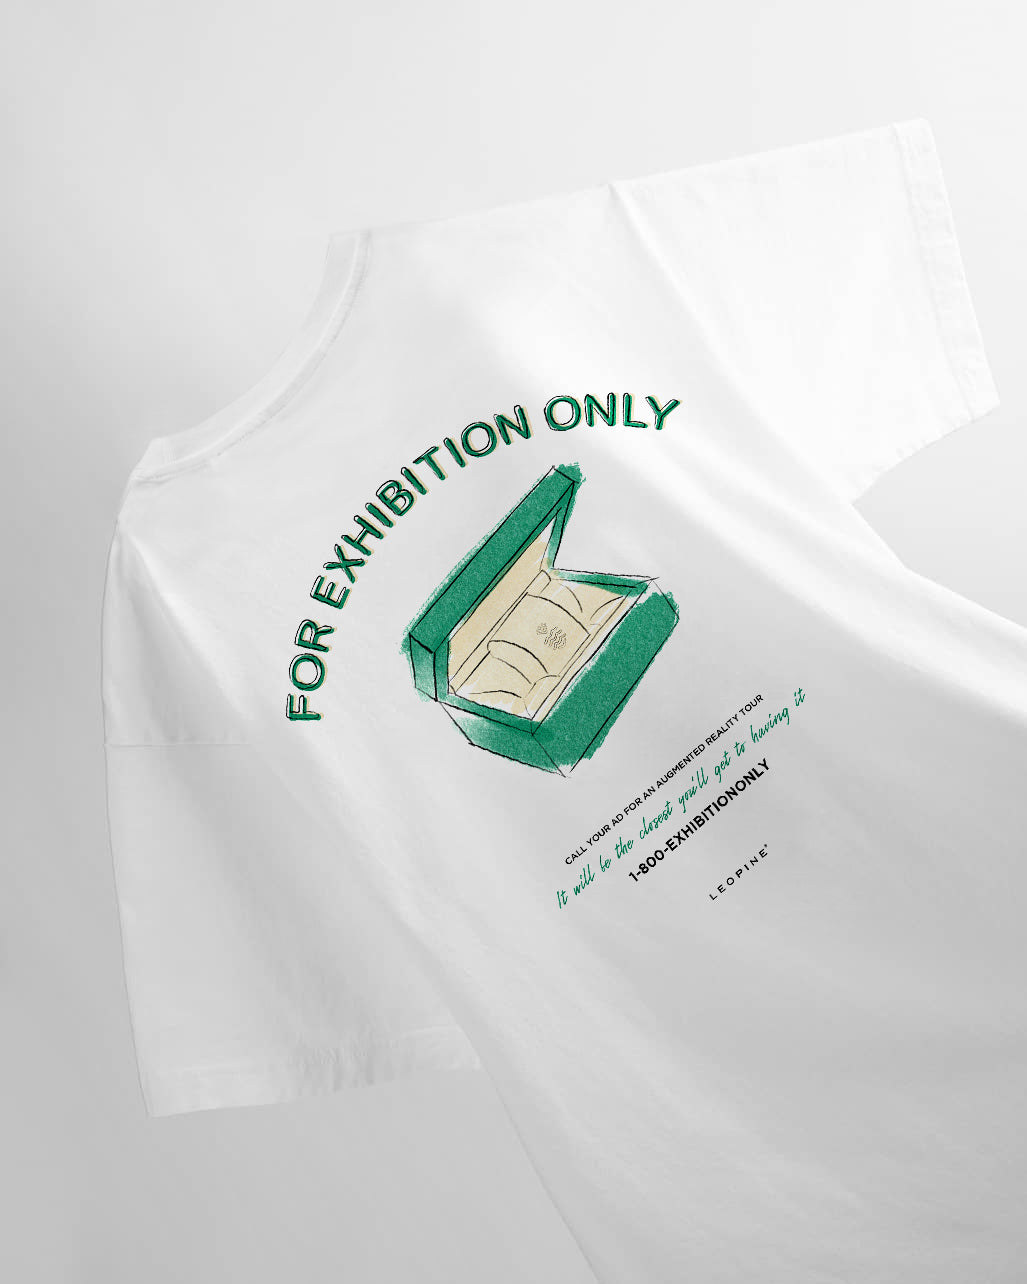 For Exhibition Only T-Shirt